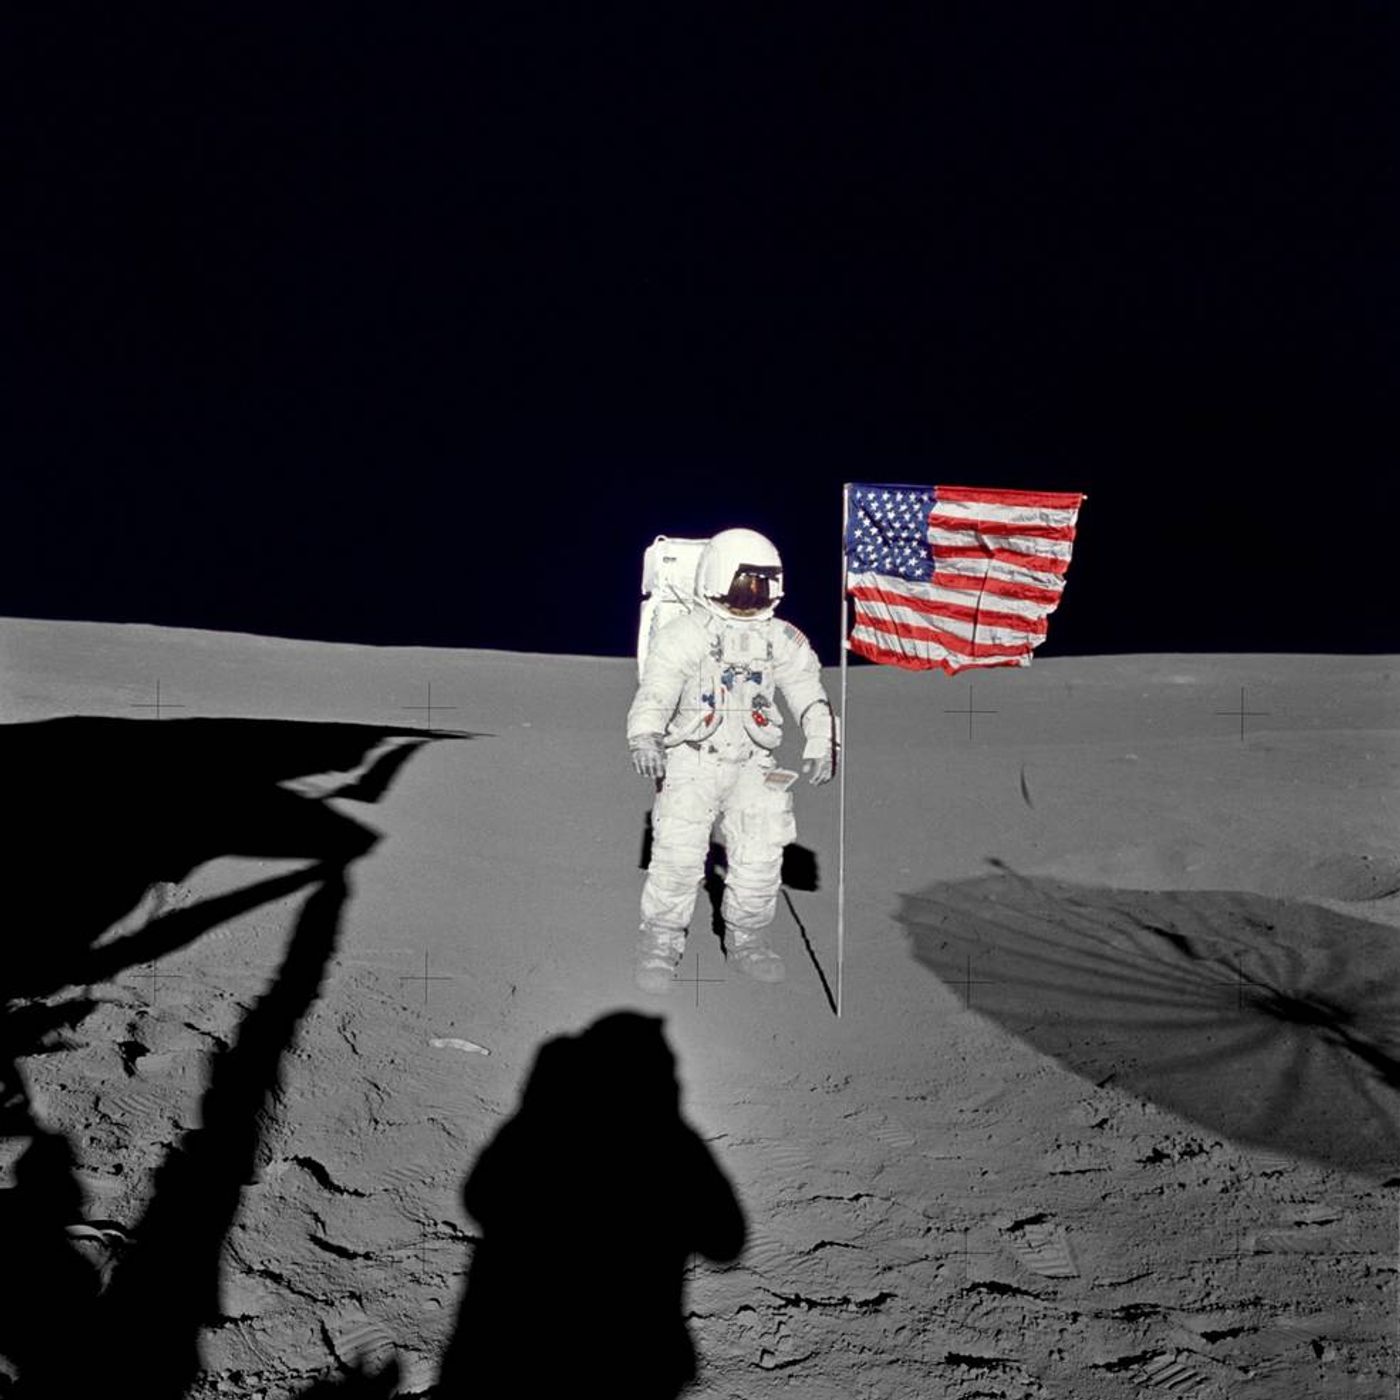 Mitchell stands beside an American flag on the Moon's surface.